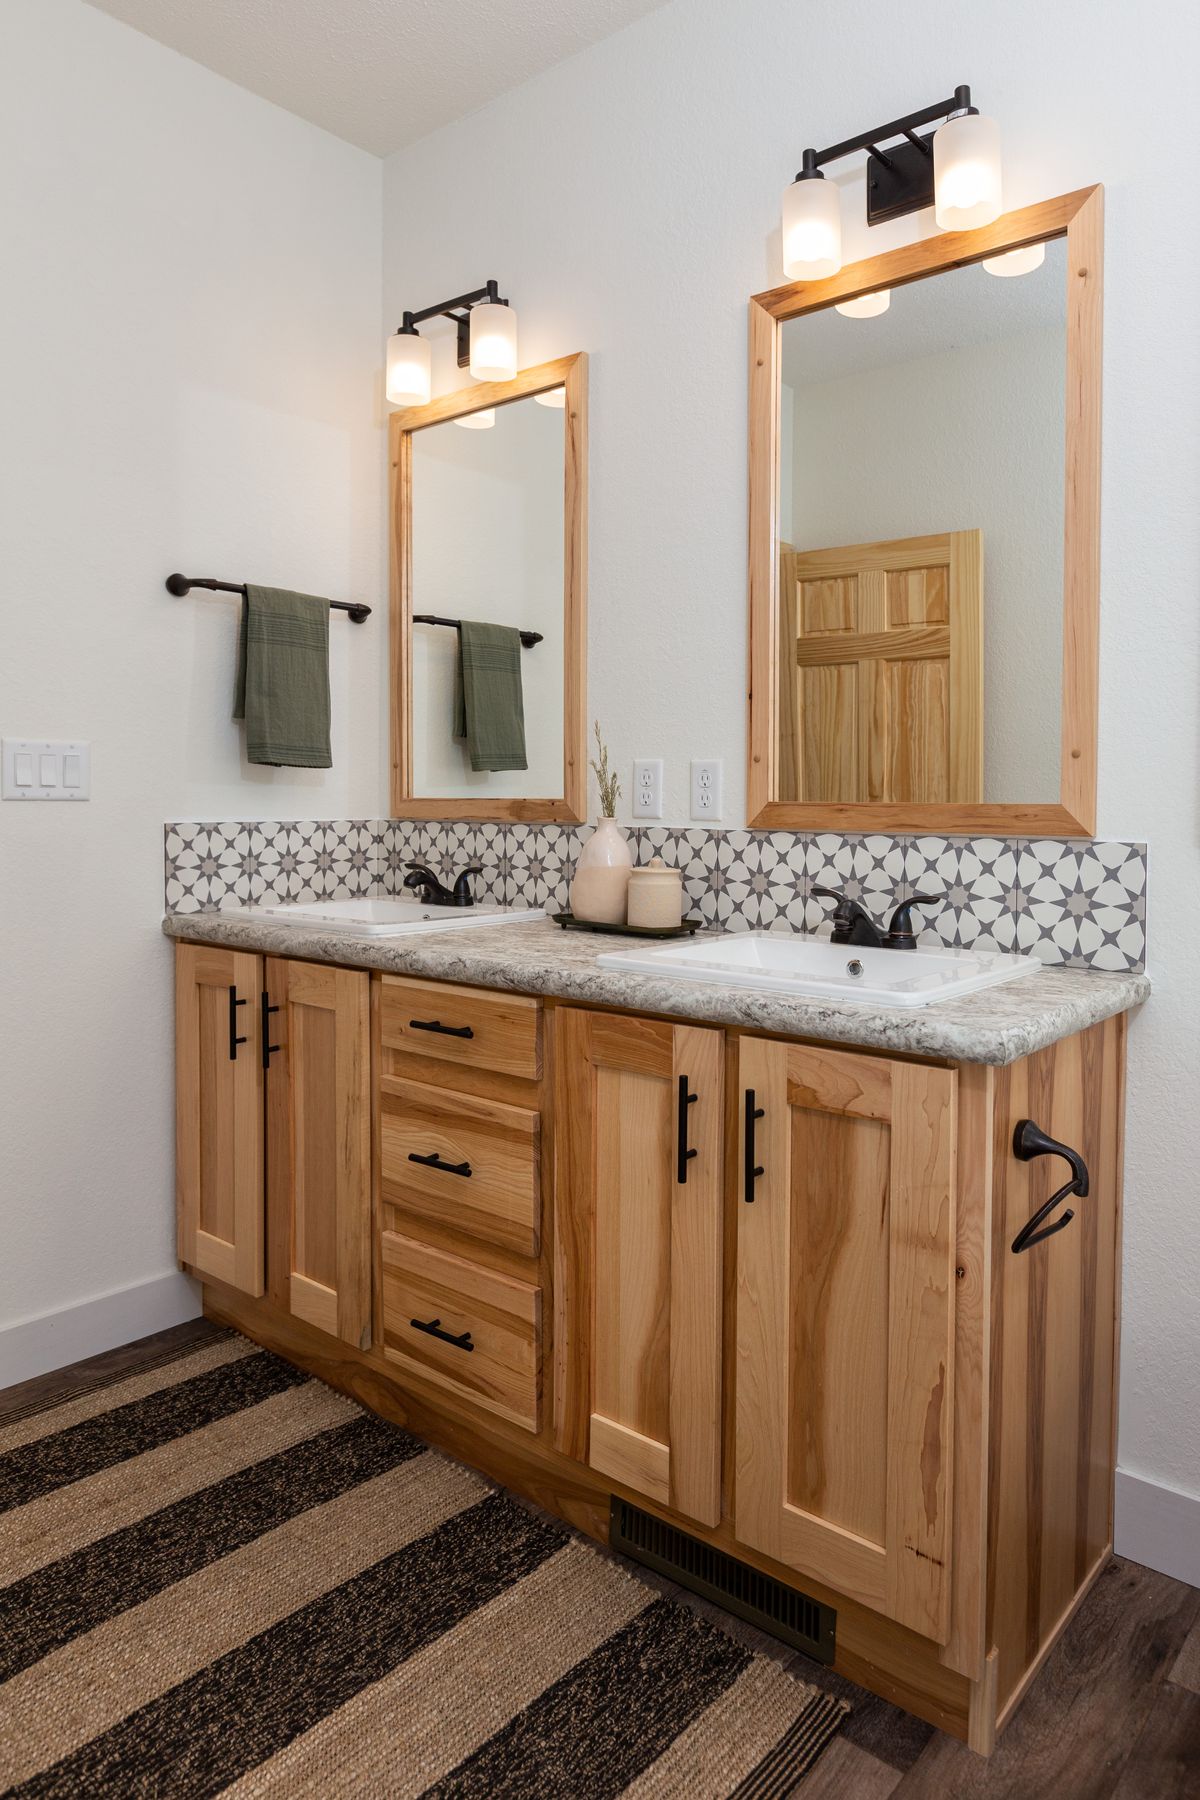 The LEGACY 412 Master Bathroom. This Manufactured Mobile Home features 3 bedrooms and 2 baths.